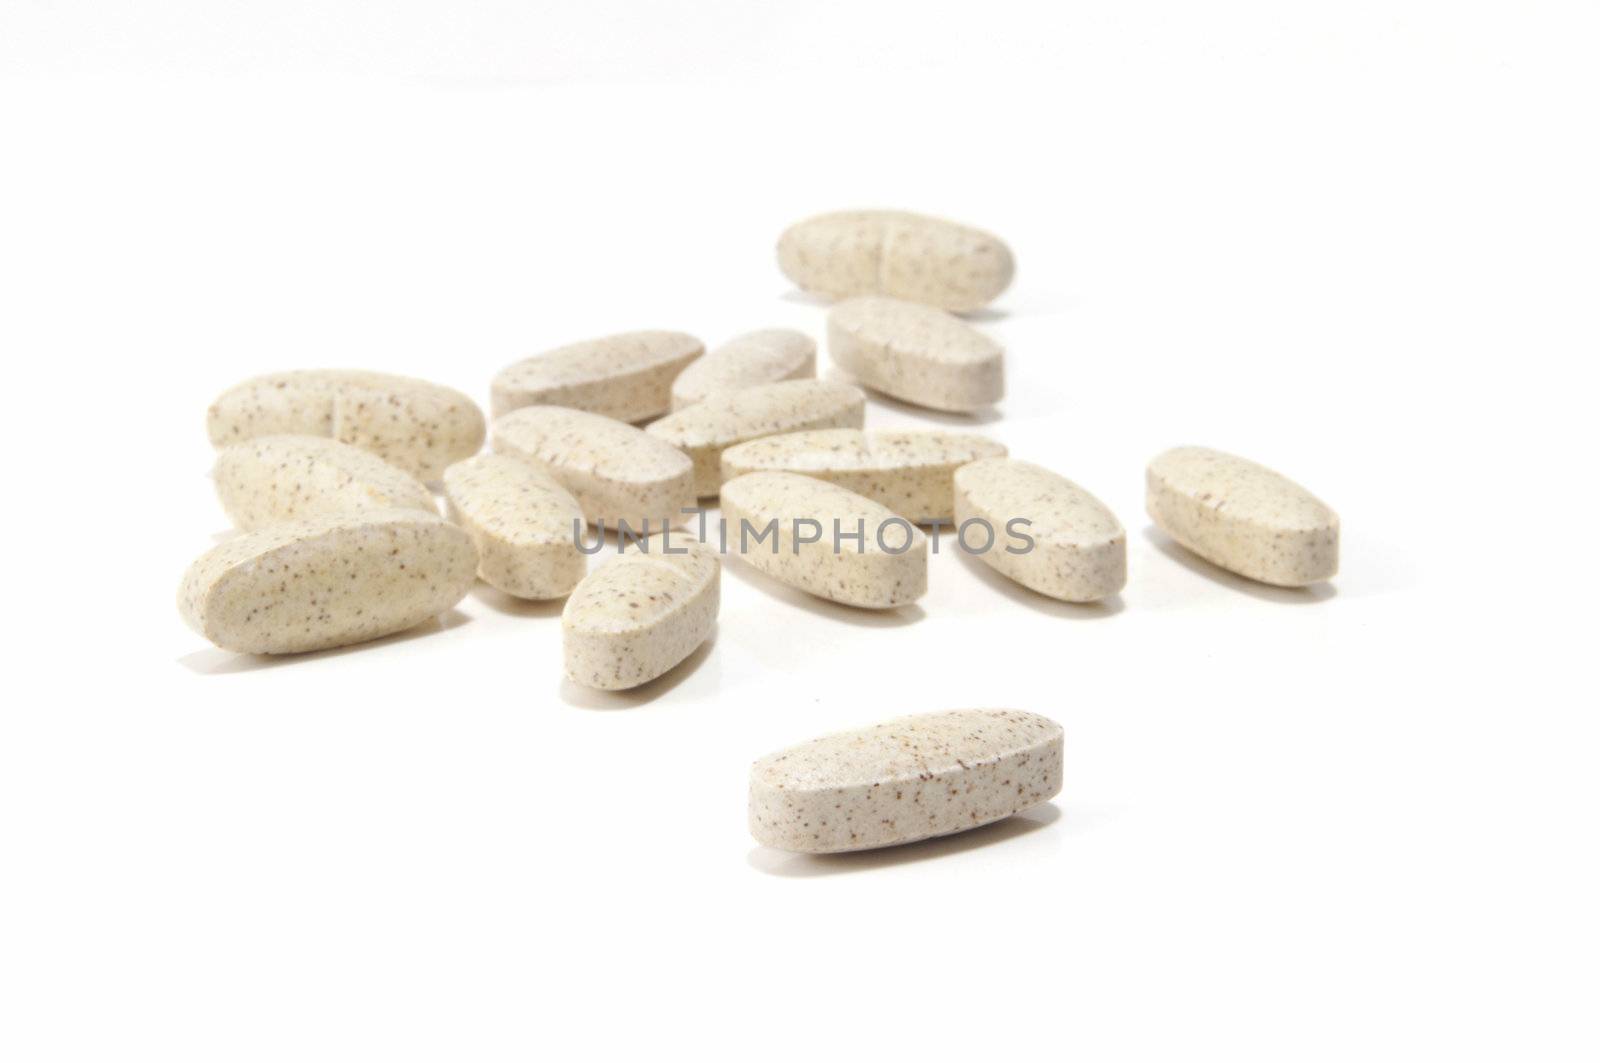 Selective focus on foreground vitamin on white background